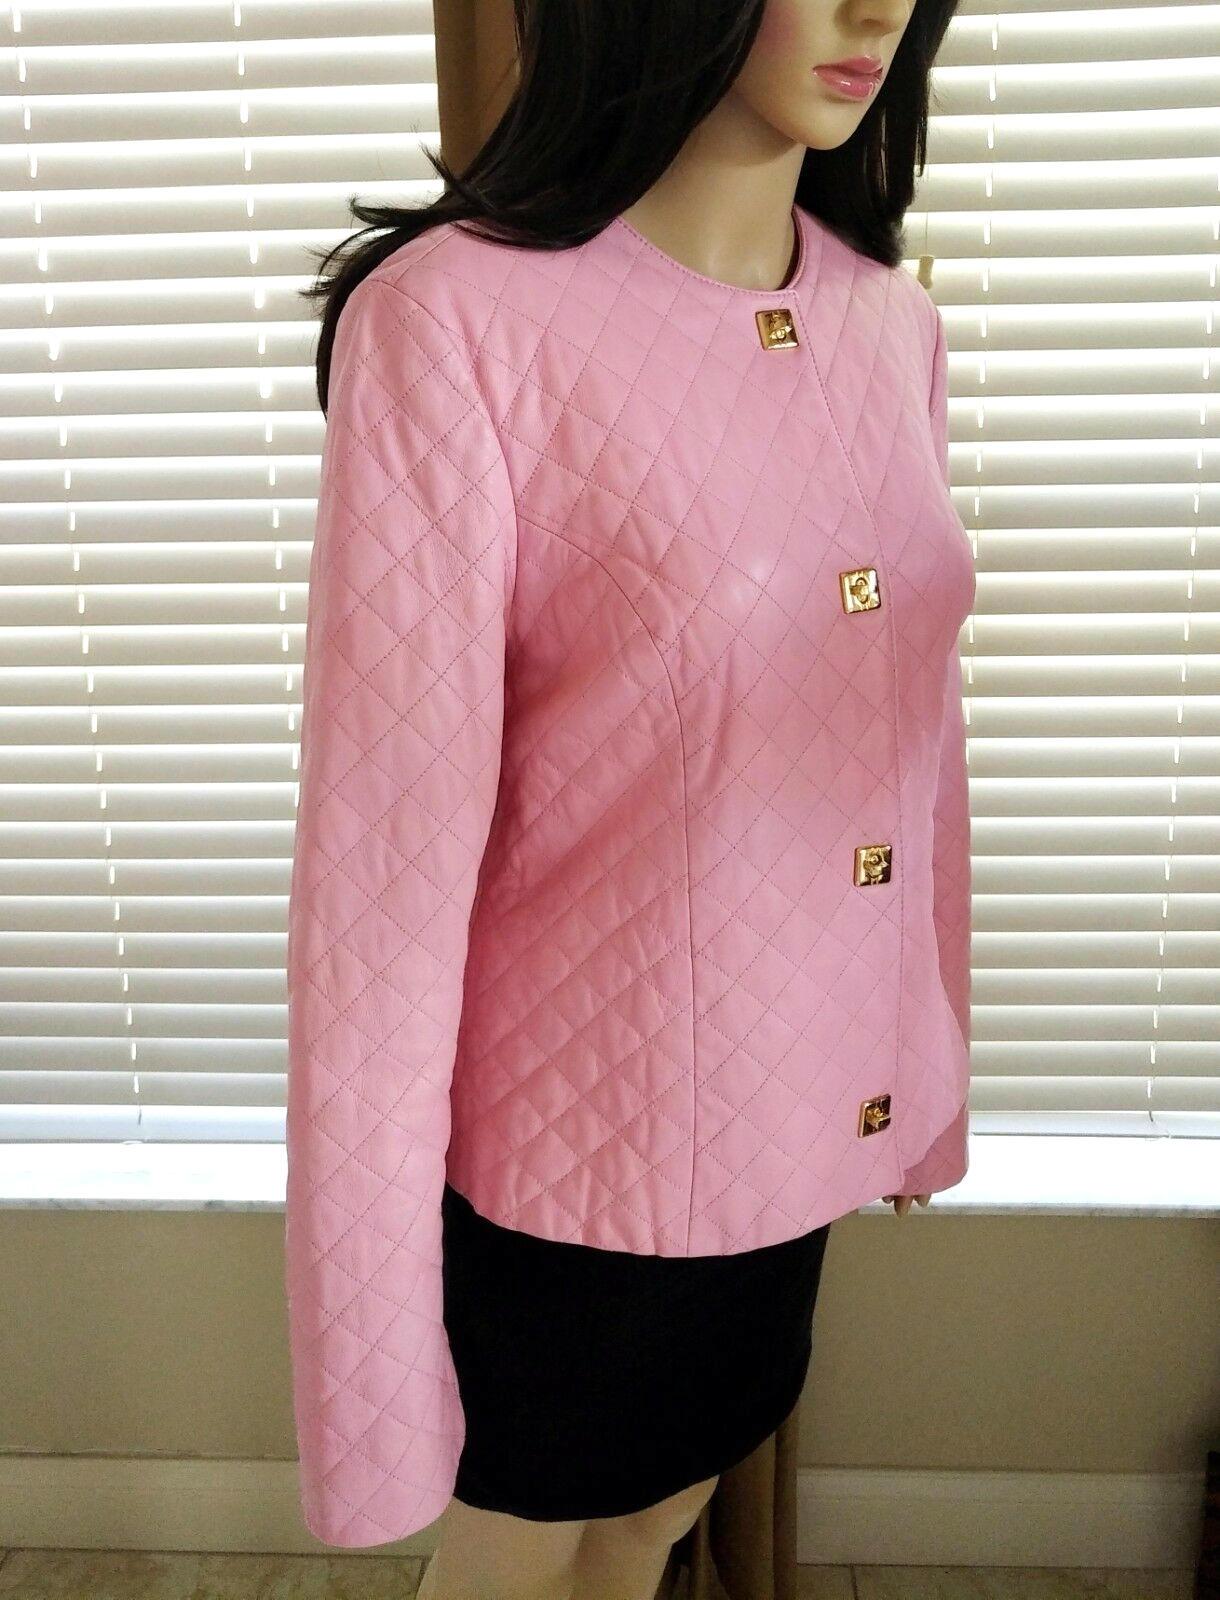  Gianfranco Ferre Petal Pink Quilted Lambskin Leather Jacket EU 38/ US 4 6 For Sale 1